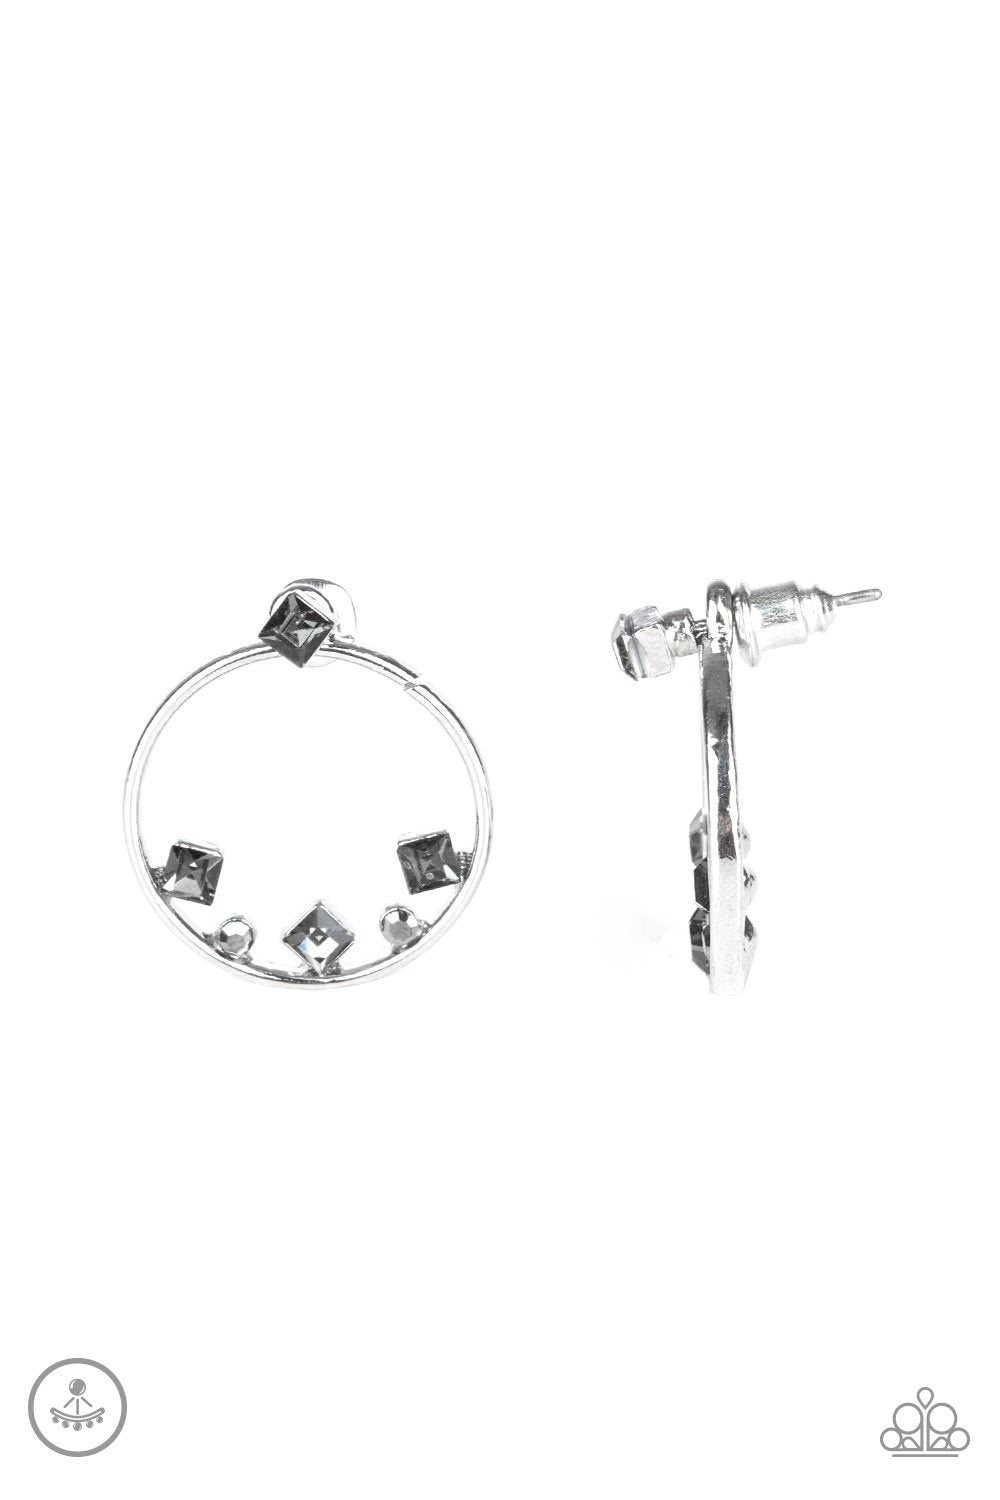 Top Notch Twinkle Silver Post Earrings - Paparazzi Accessories - lightbox -CarasShop.com - $5 Jewelry by Cara Jewels